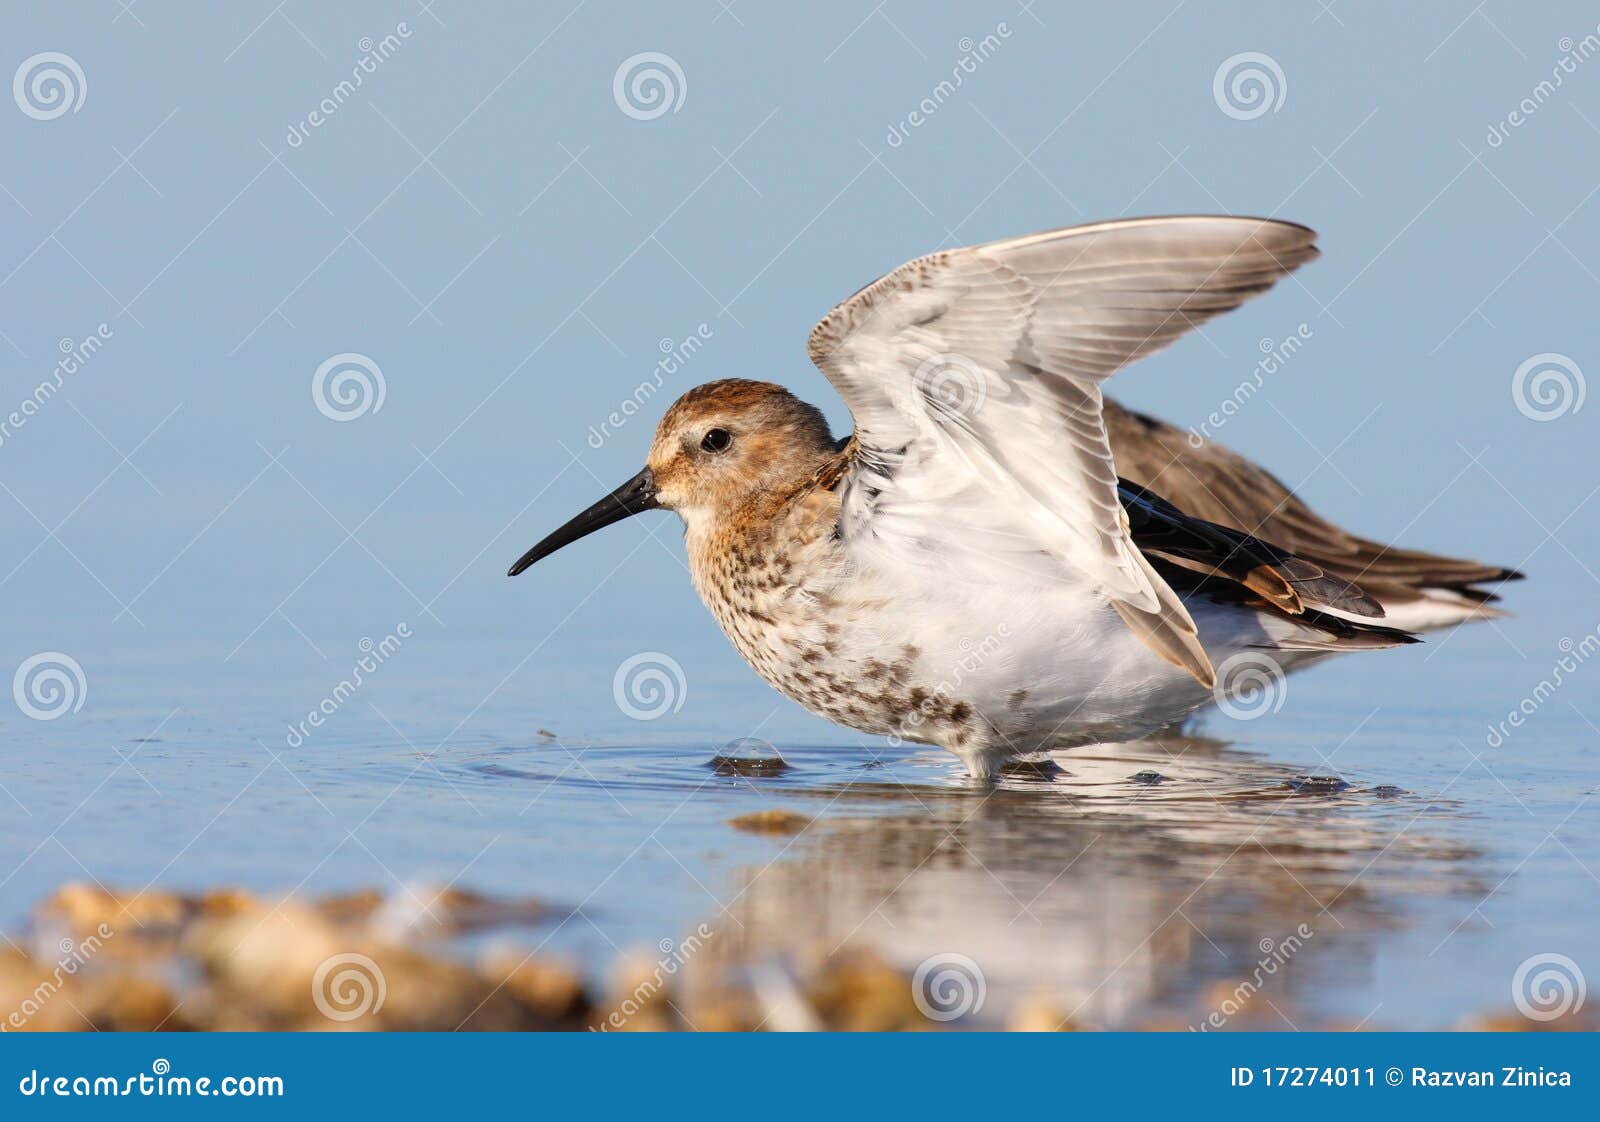 dunlin with winter plumage